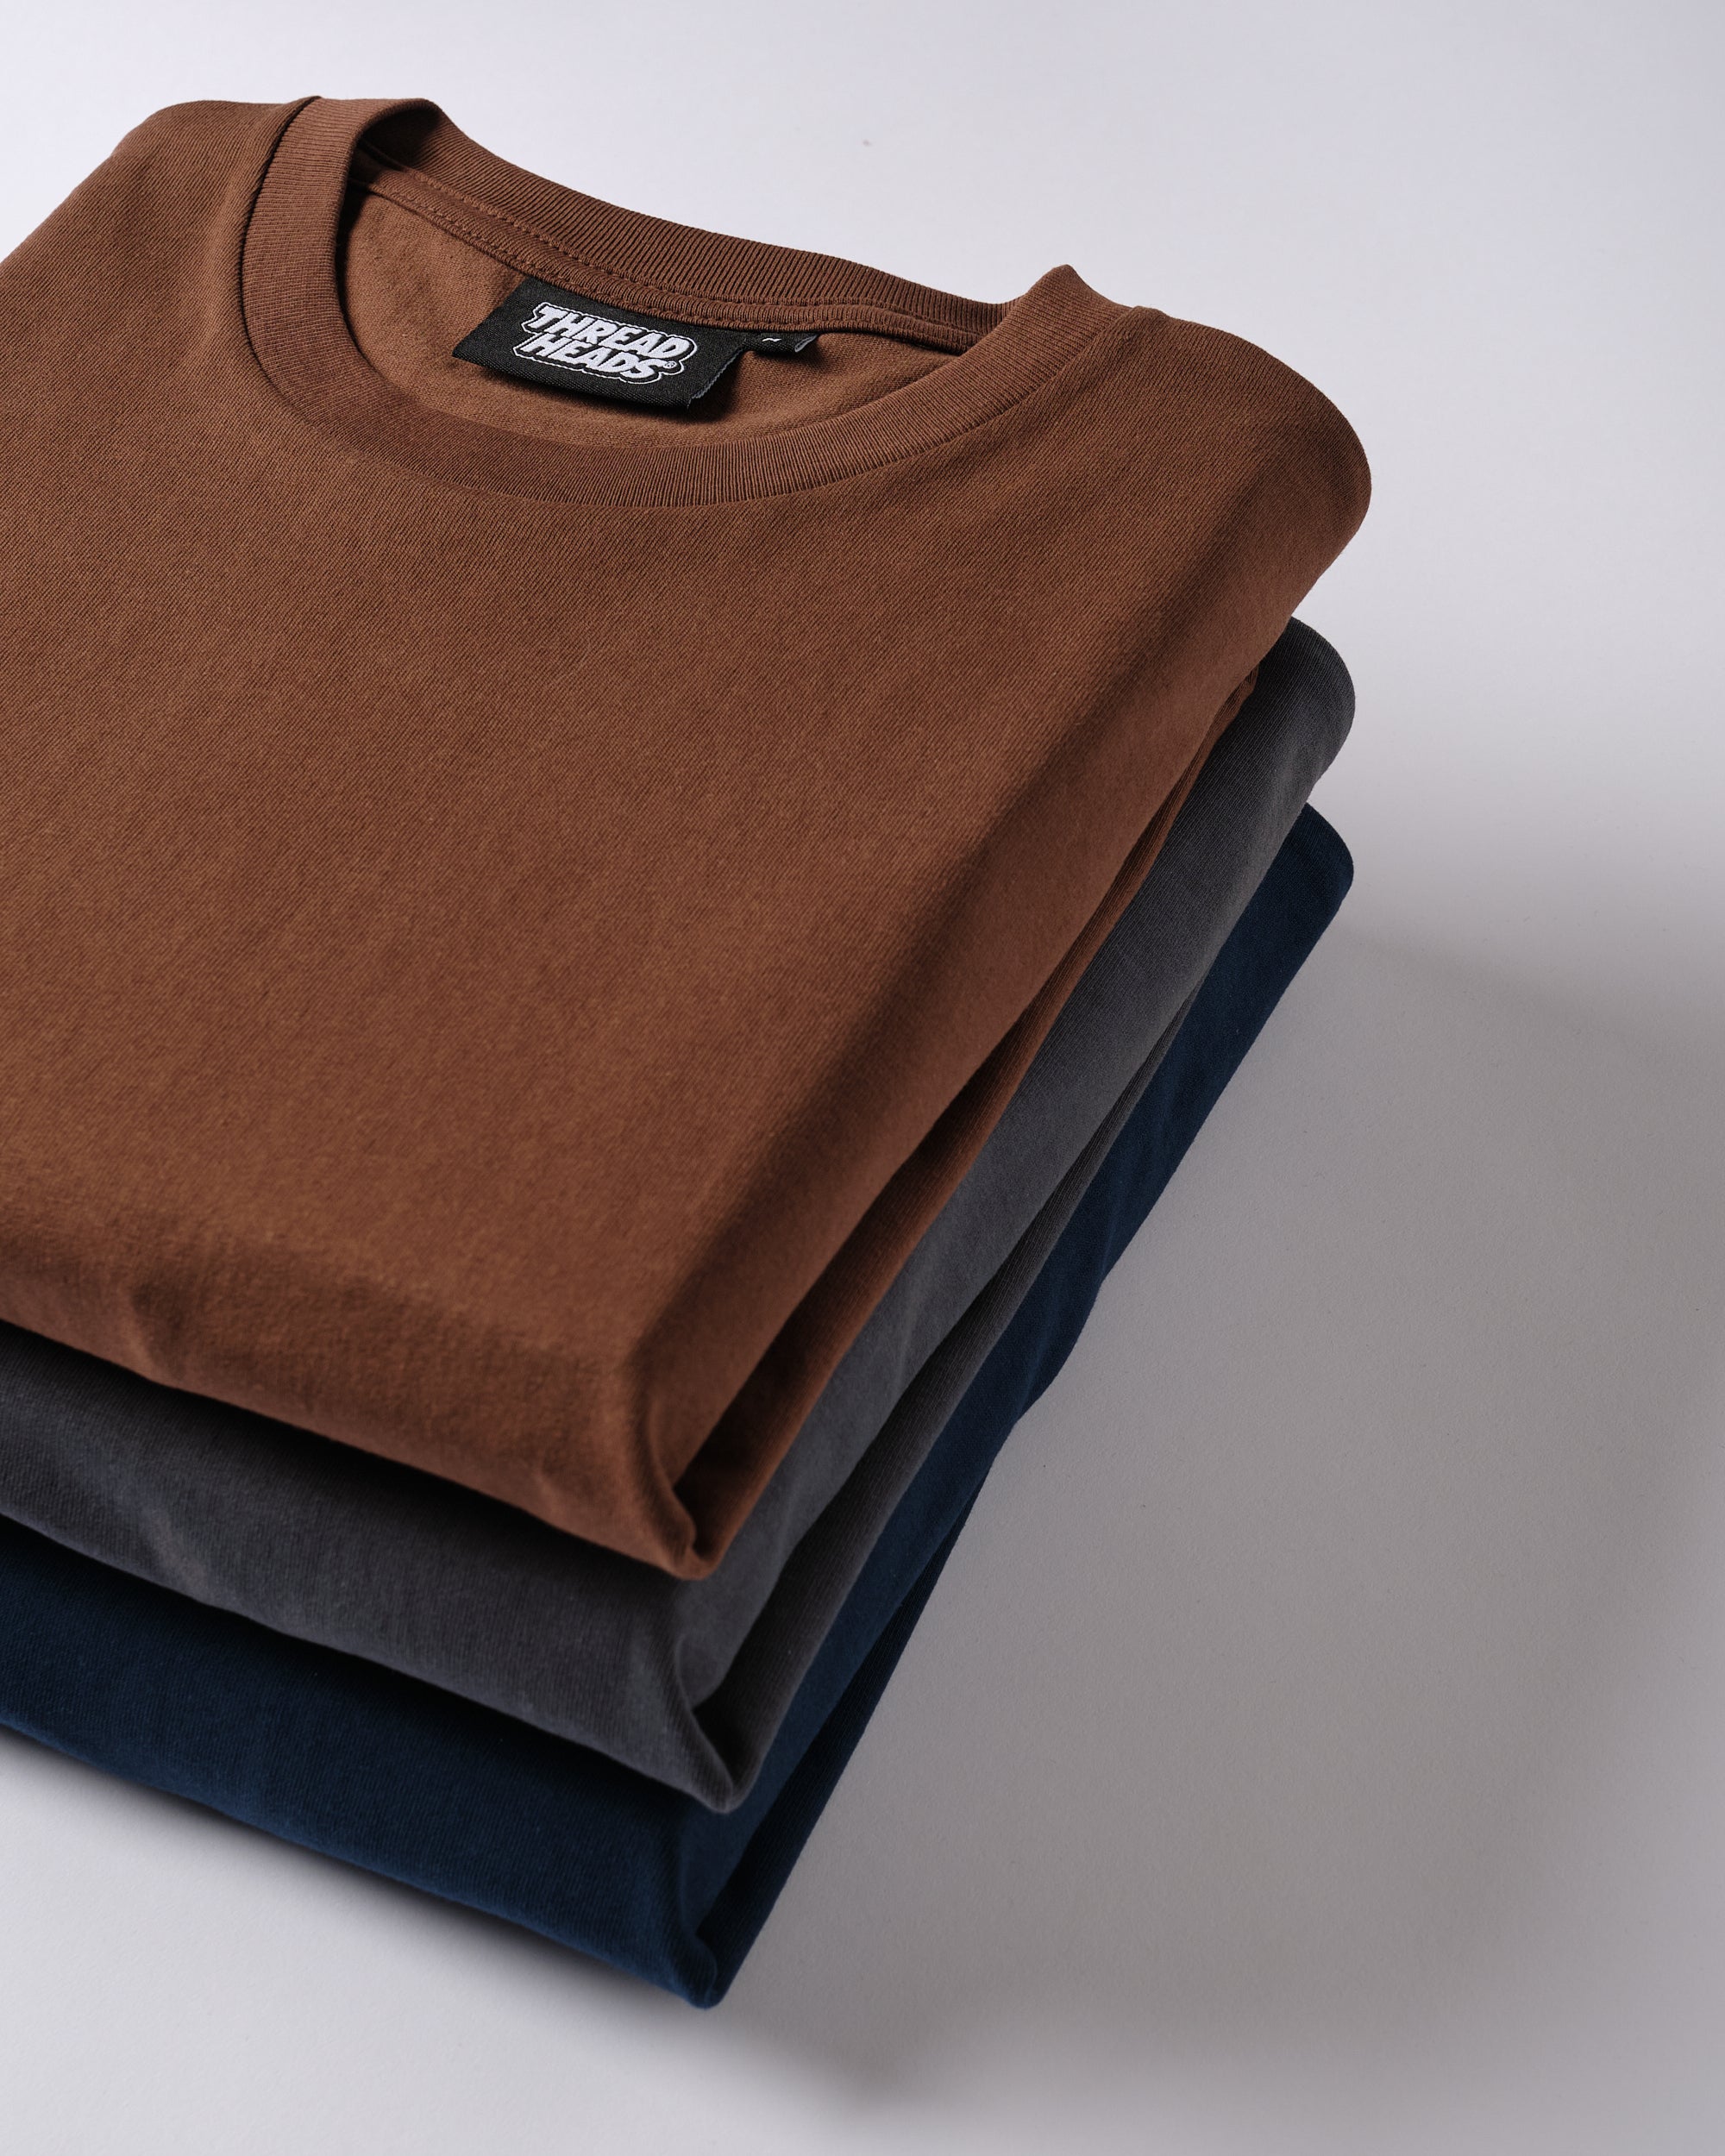 Classic Tee 3-Pack: Charcoal, Navy, Brown